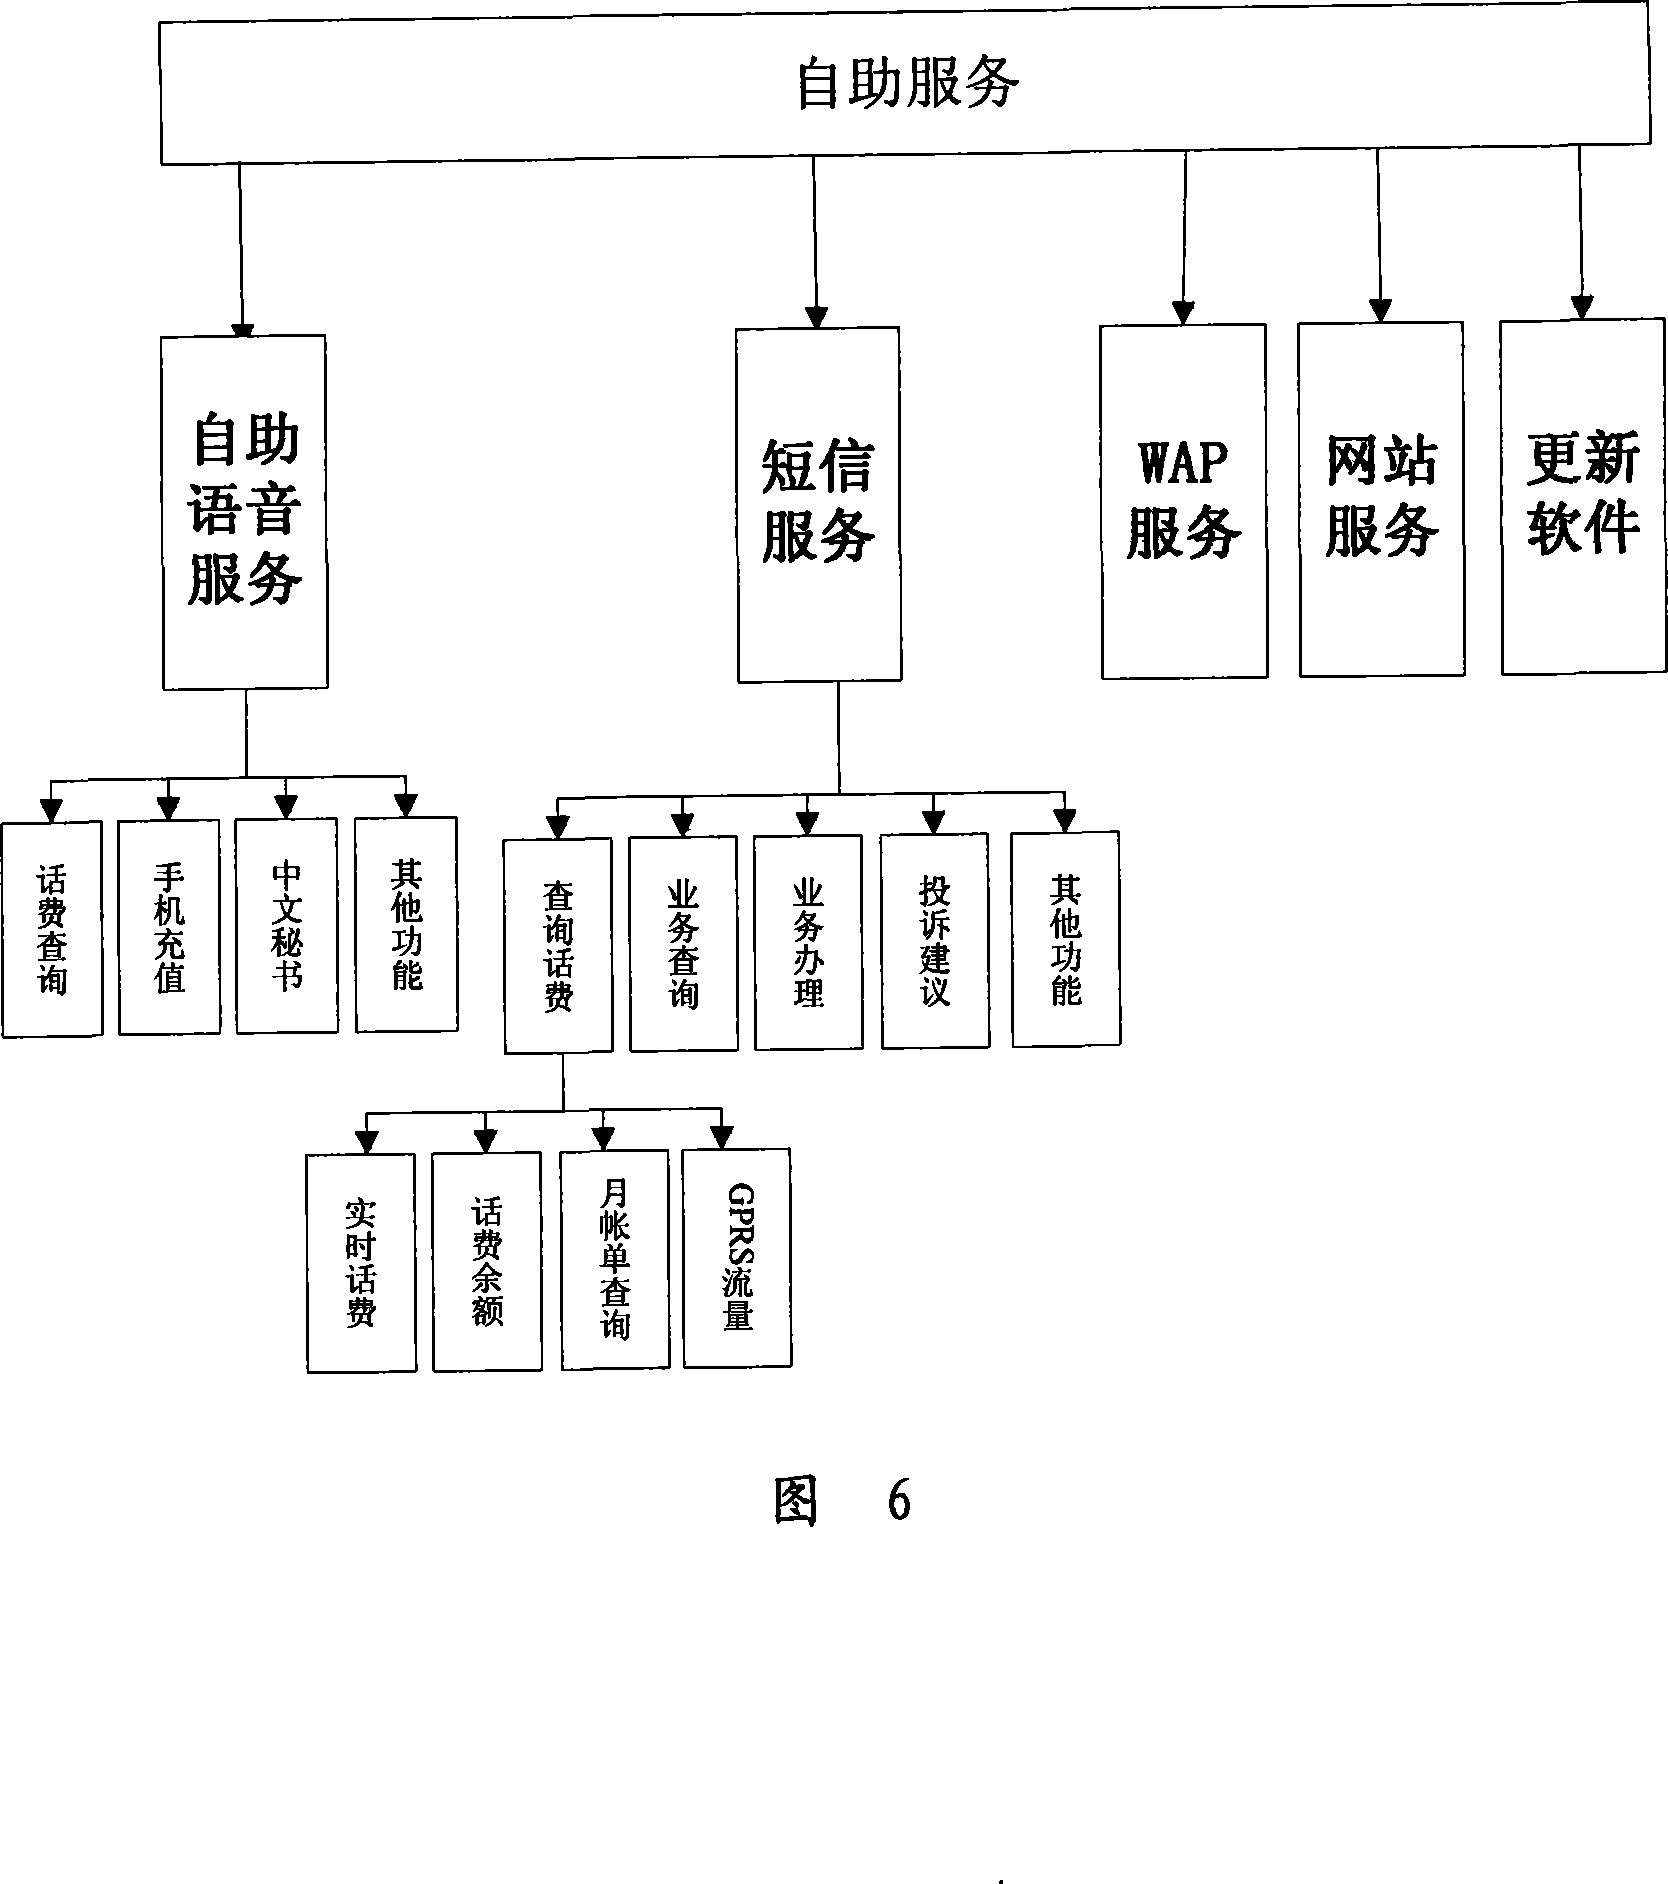 Method of implementing self-help service and self-help service platform